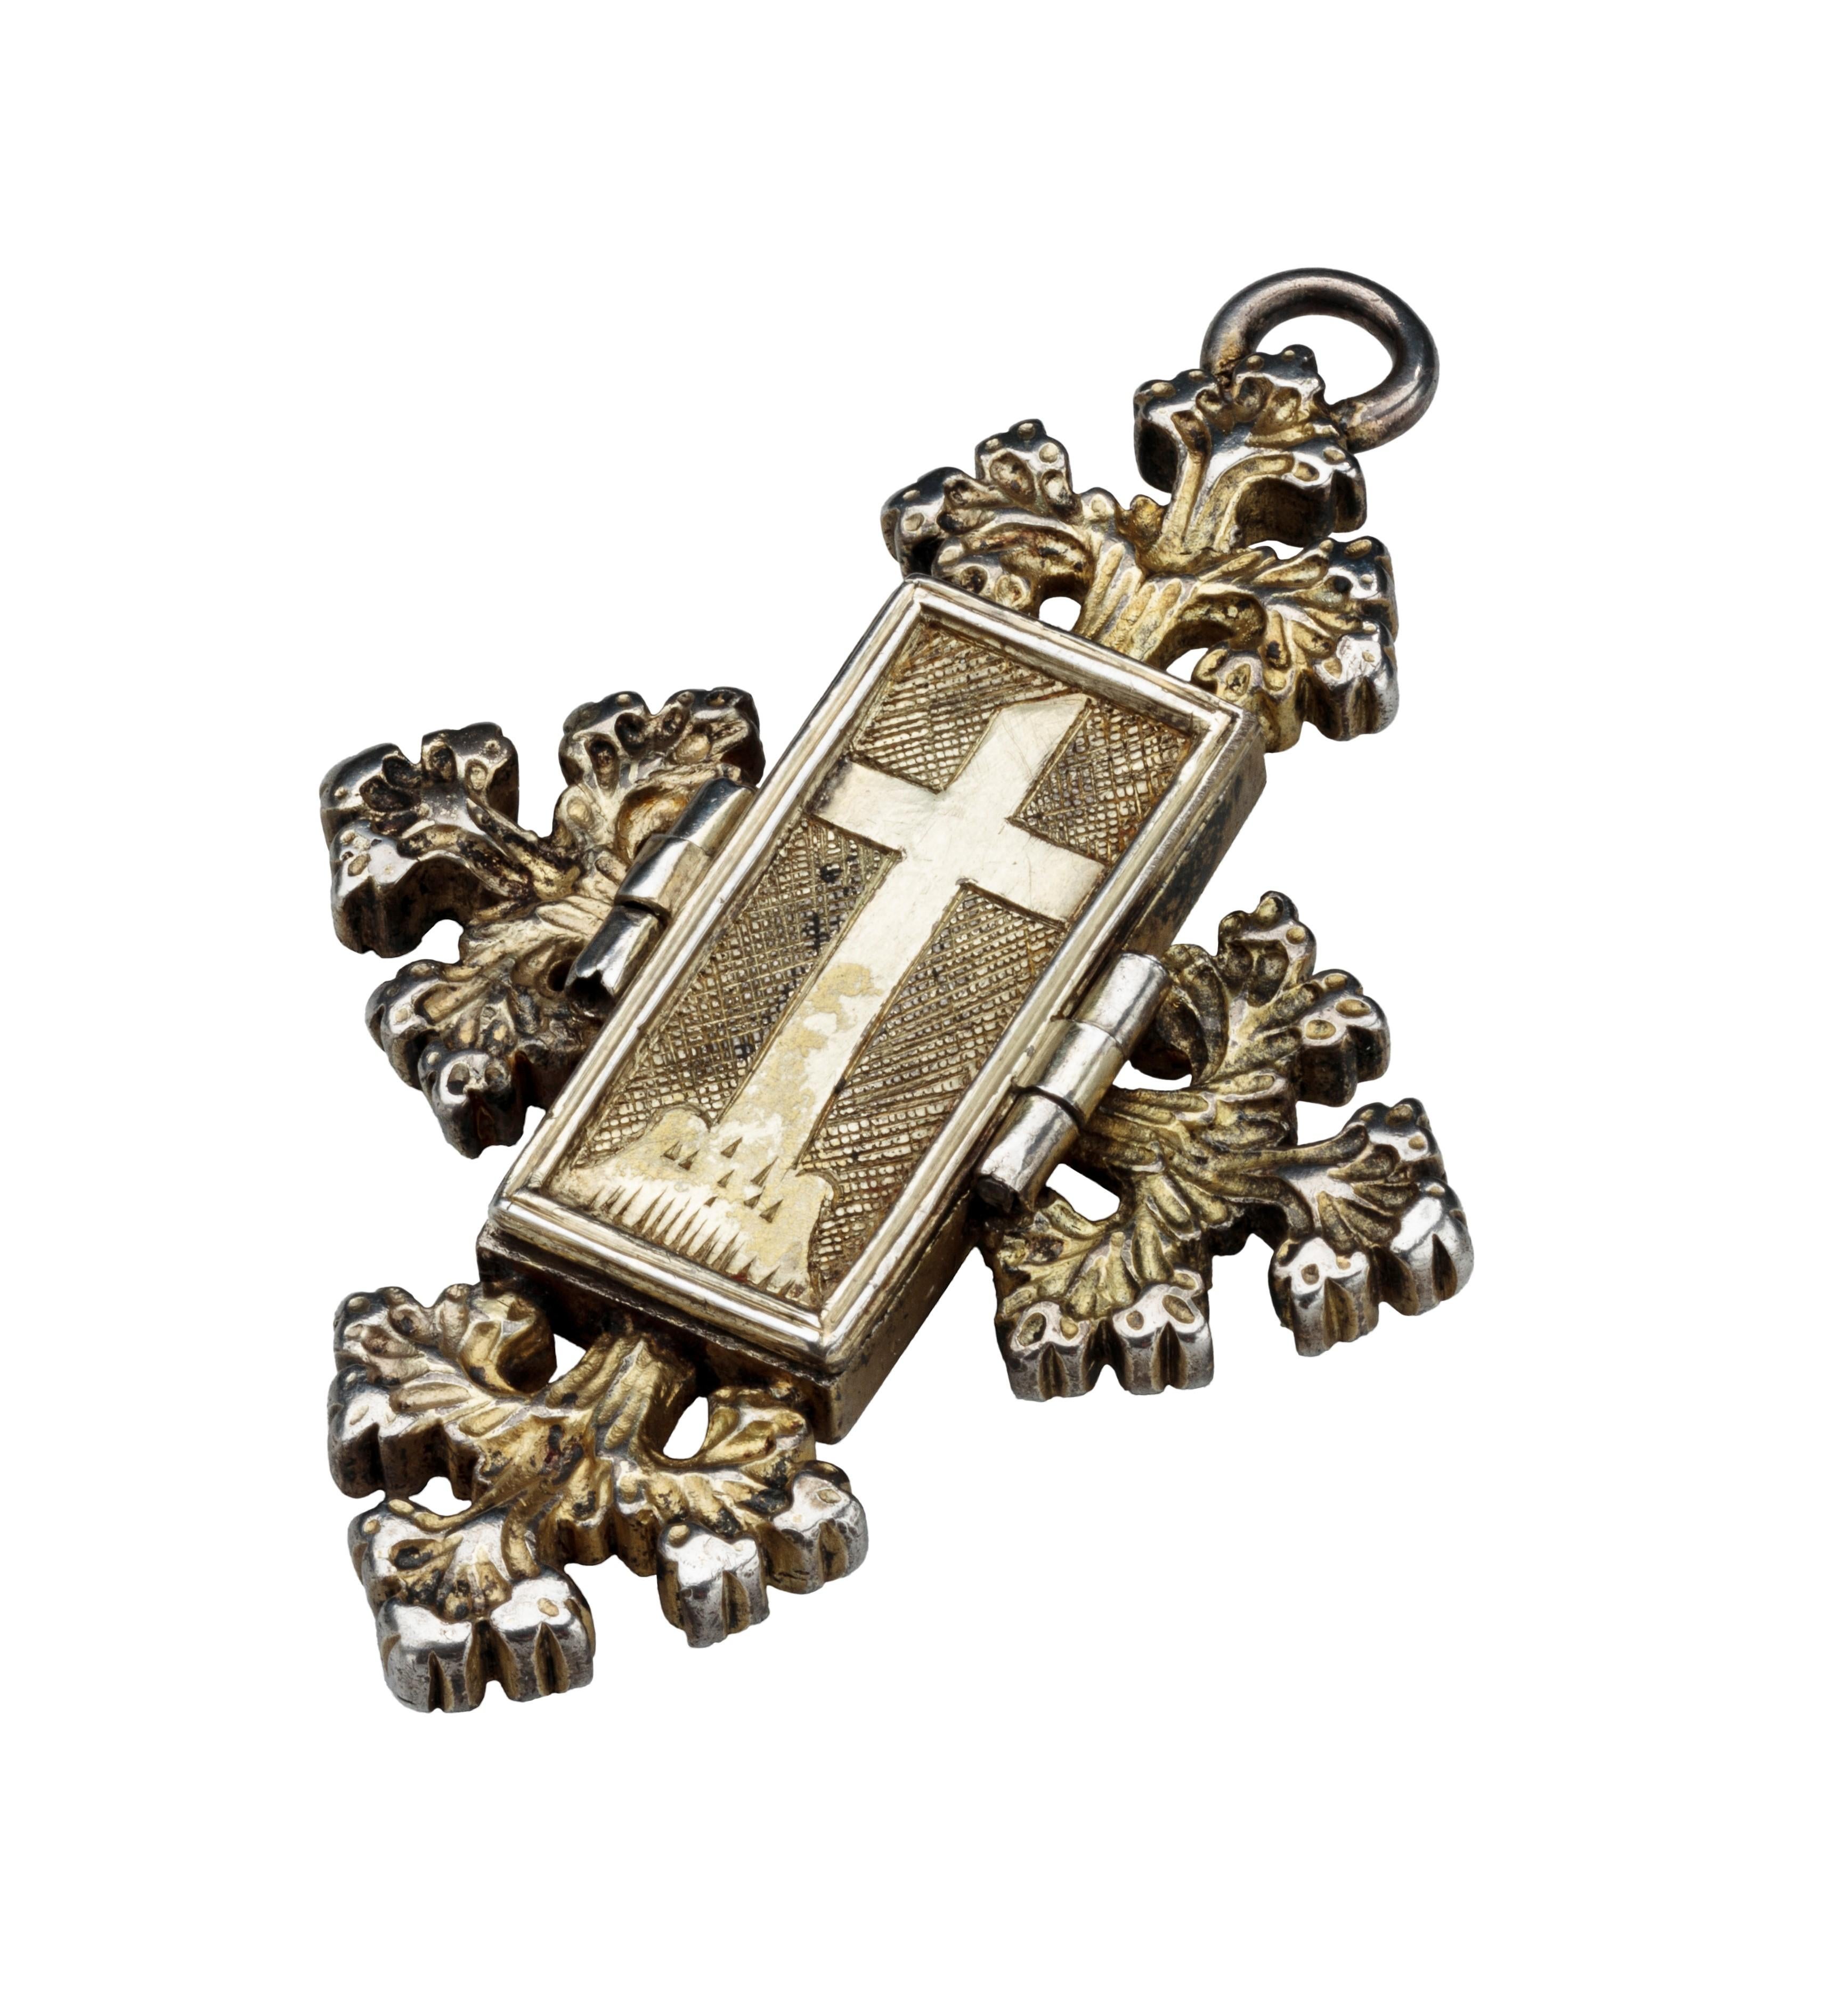 Reliquary Pendant with Christ on the Cross
Germany, c. 1480–1500
Gilded silver
Weight 35 grams; dimensions 69 × 46 × 8 mm

A mixture of forms gives this pendant a rare expressiveness. At its core is a hinged rectangular box that likely once